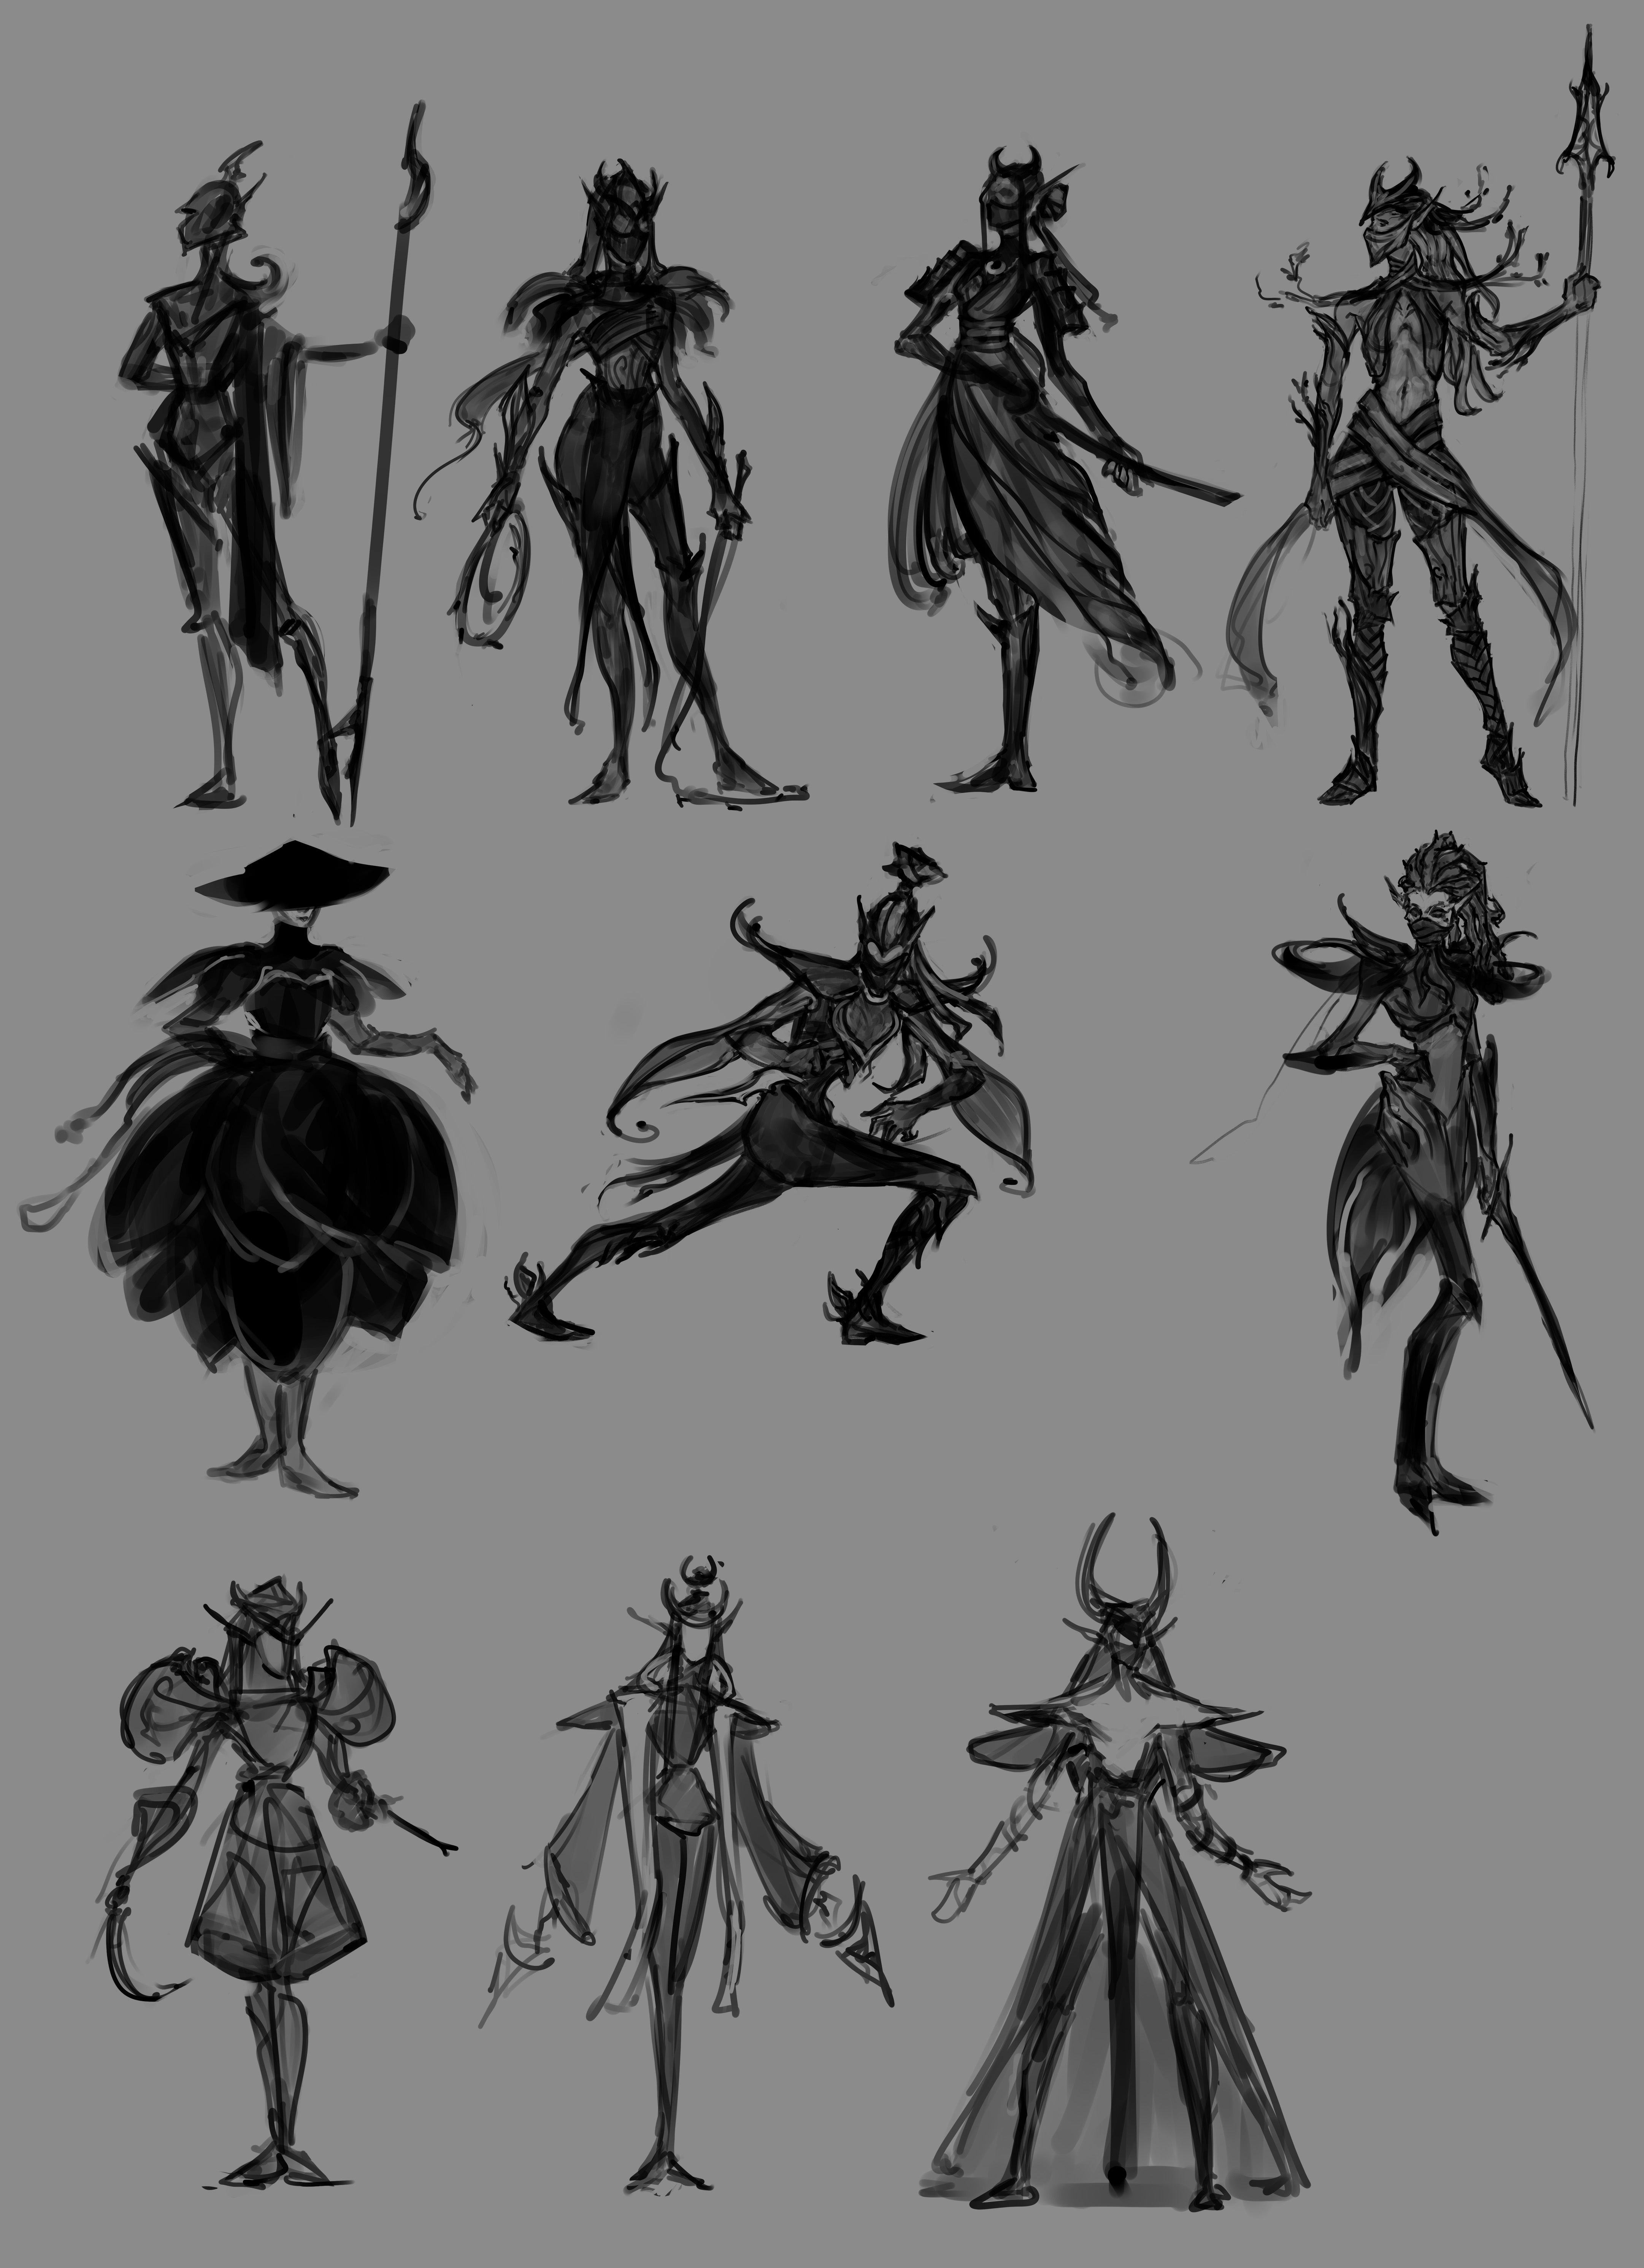 Character thumbnail sketches on the theme 'growth'.